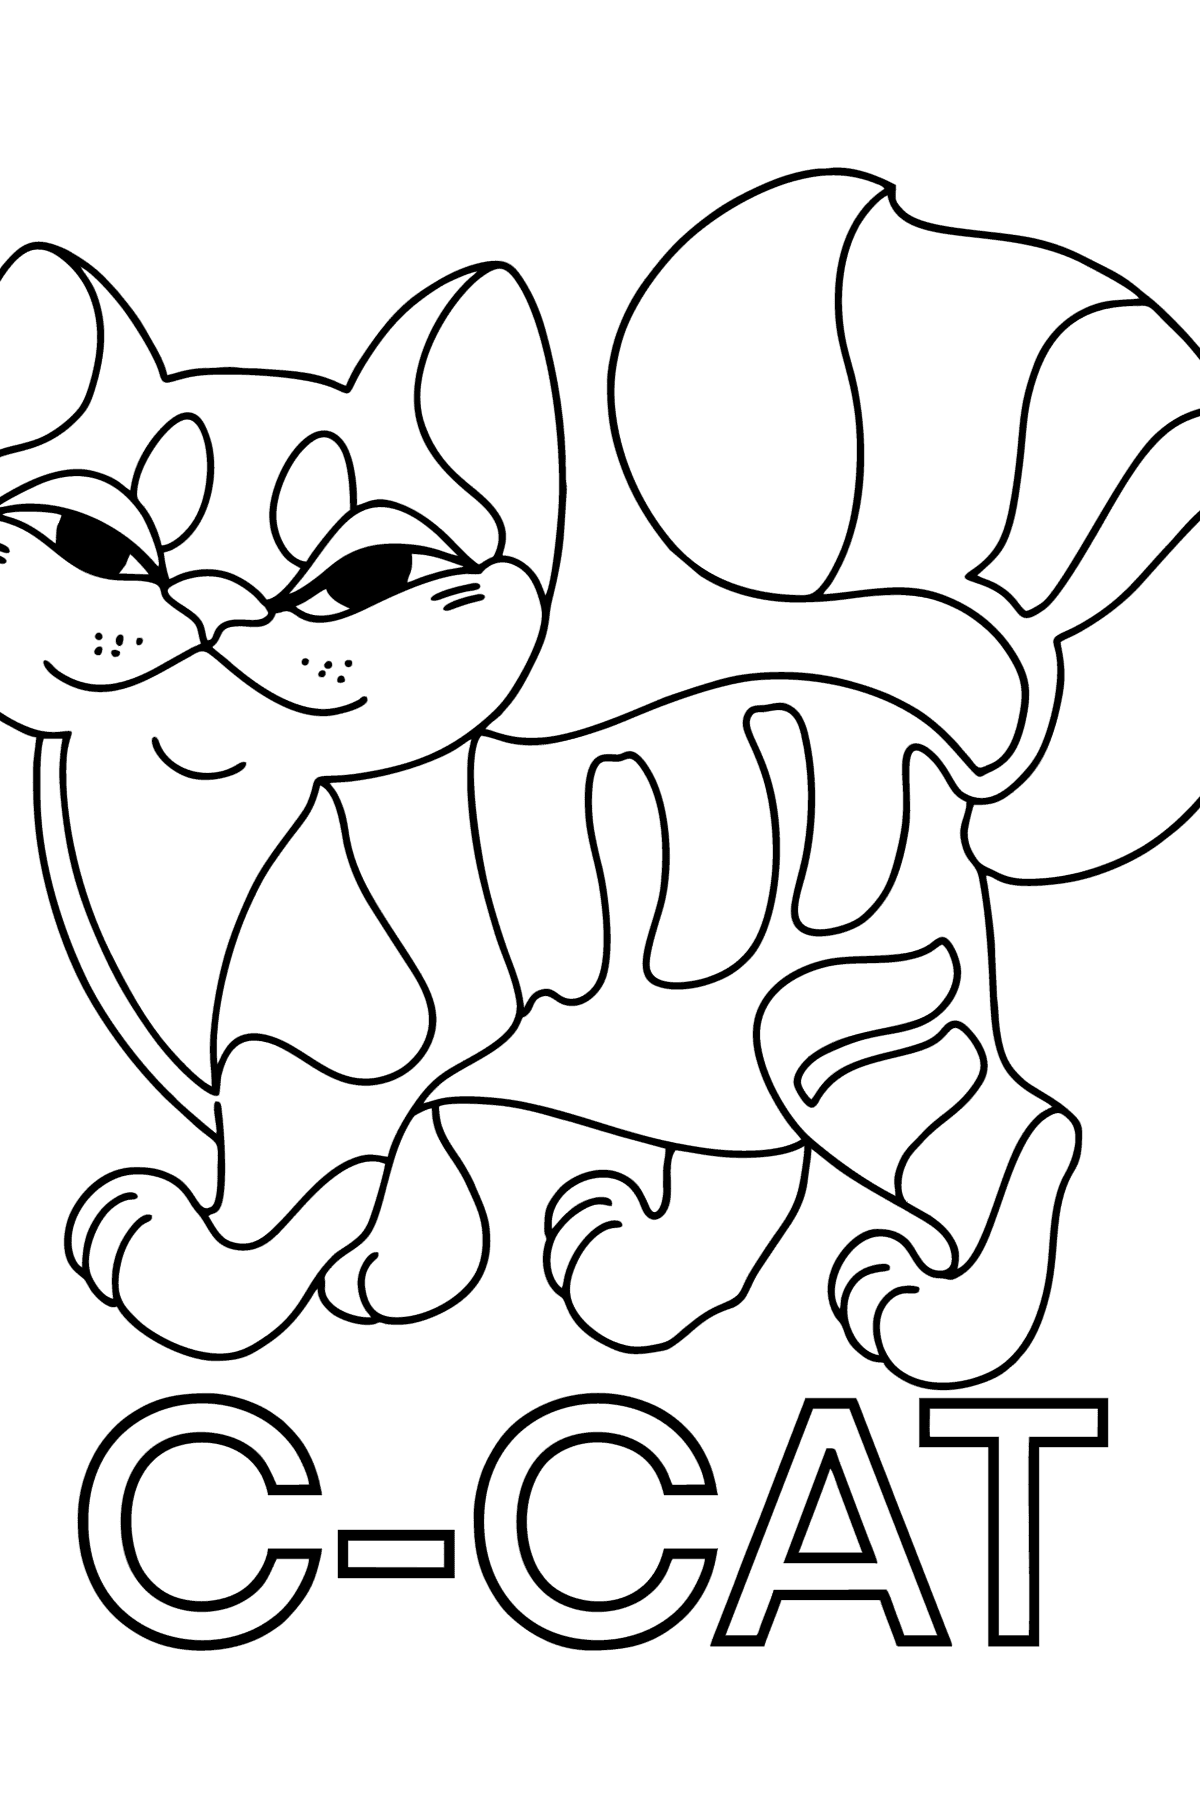 English Letter C coloring page - Coloring Pages for Kids